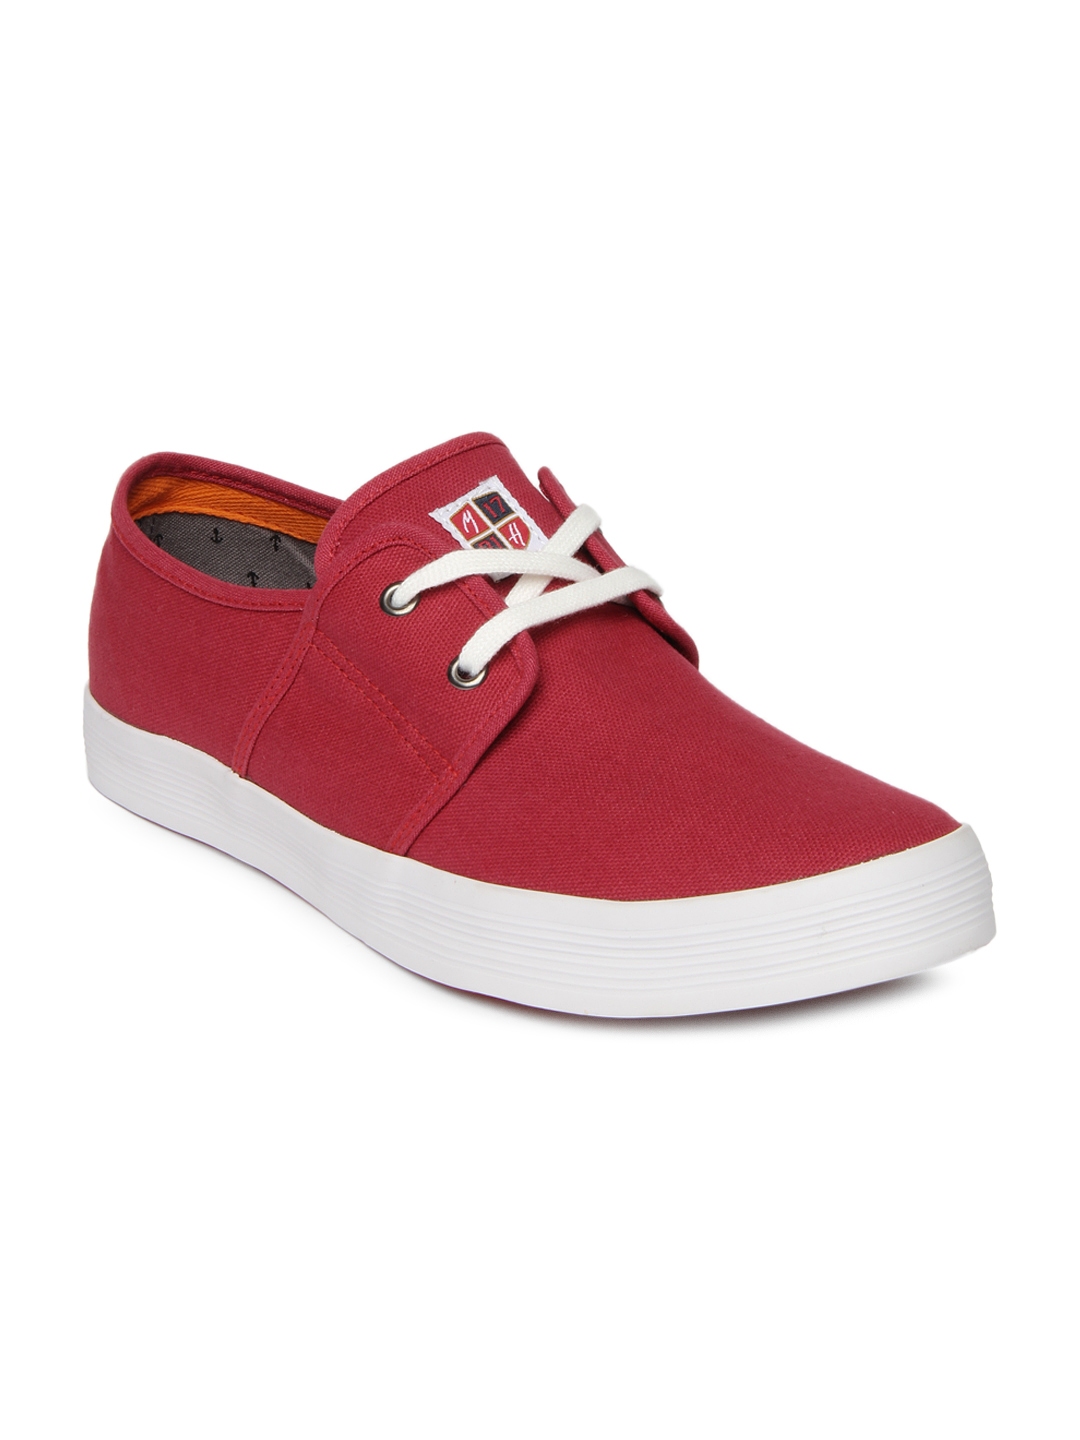 Buy Mast & Harbour Men Red Casual Shoes - Casual Shoes for Men 438803 ...